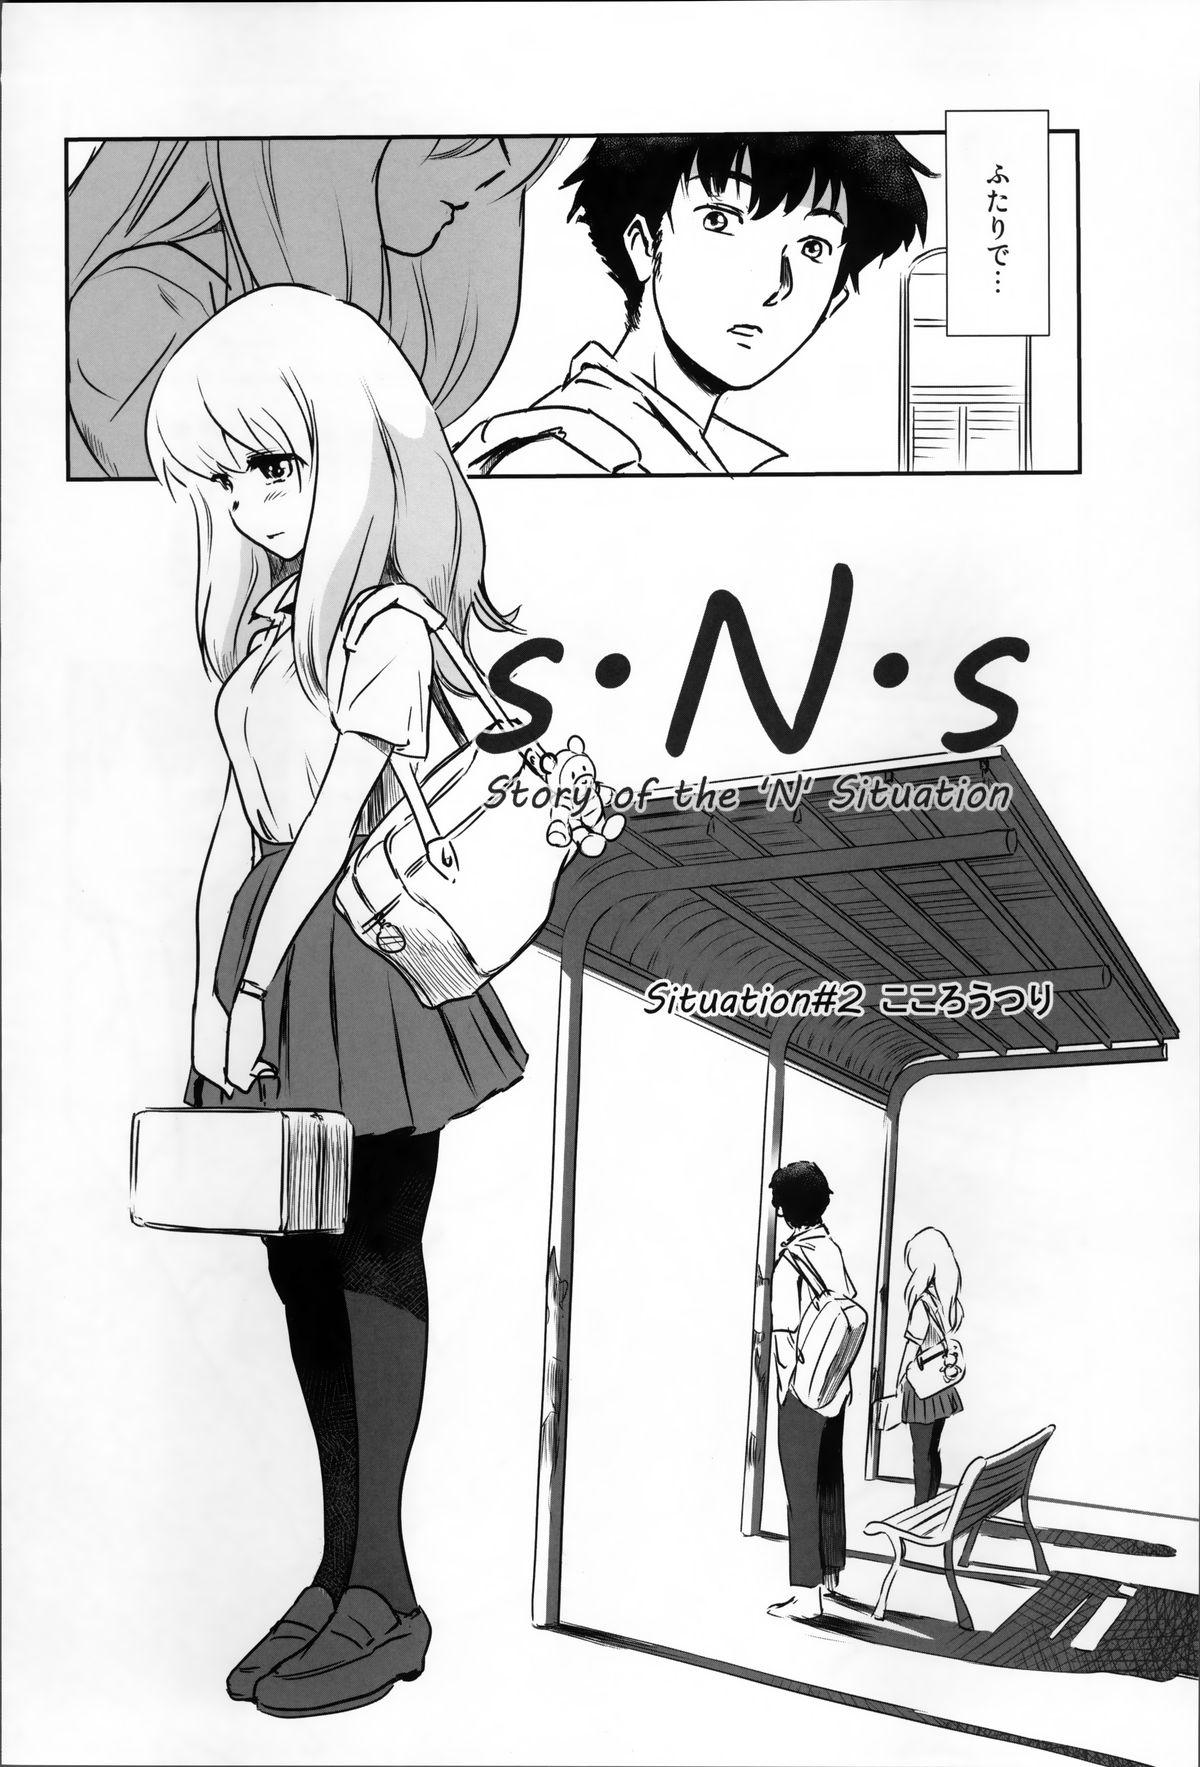 Stepfamily Story of the 'N' Situation - Situation#2 Kokoro Utsuri Ass Fucking - Page 4